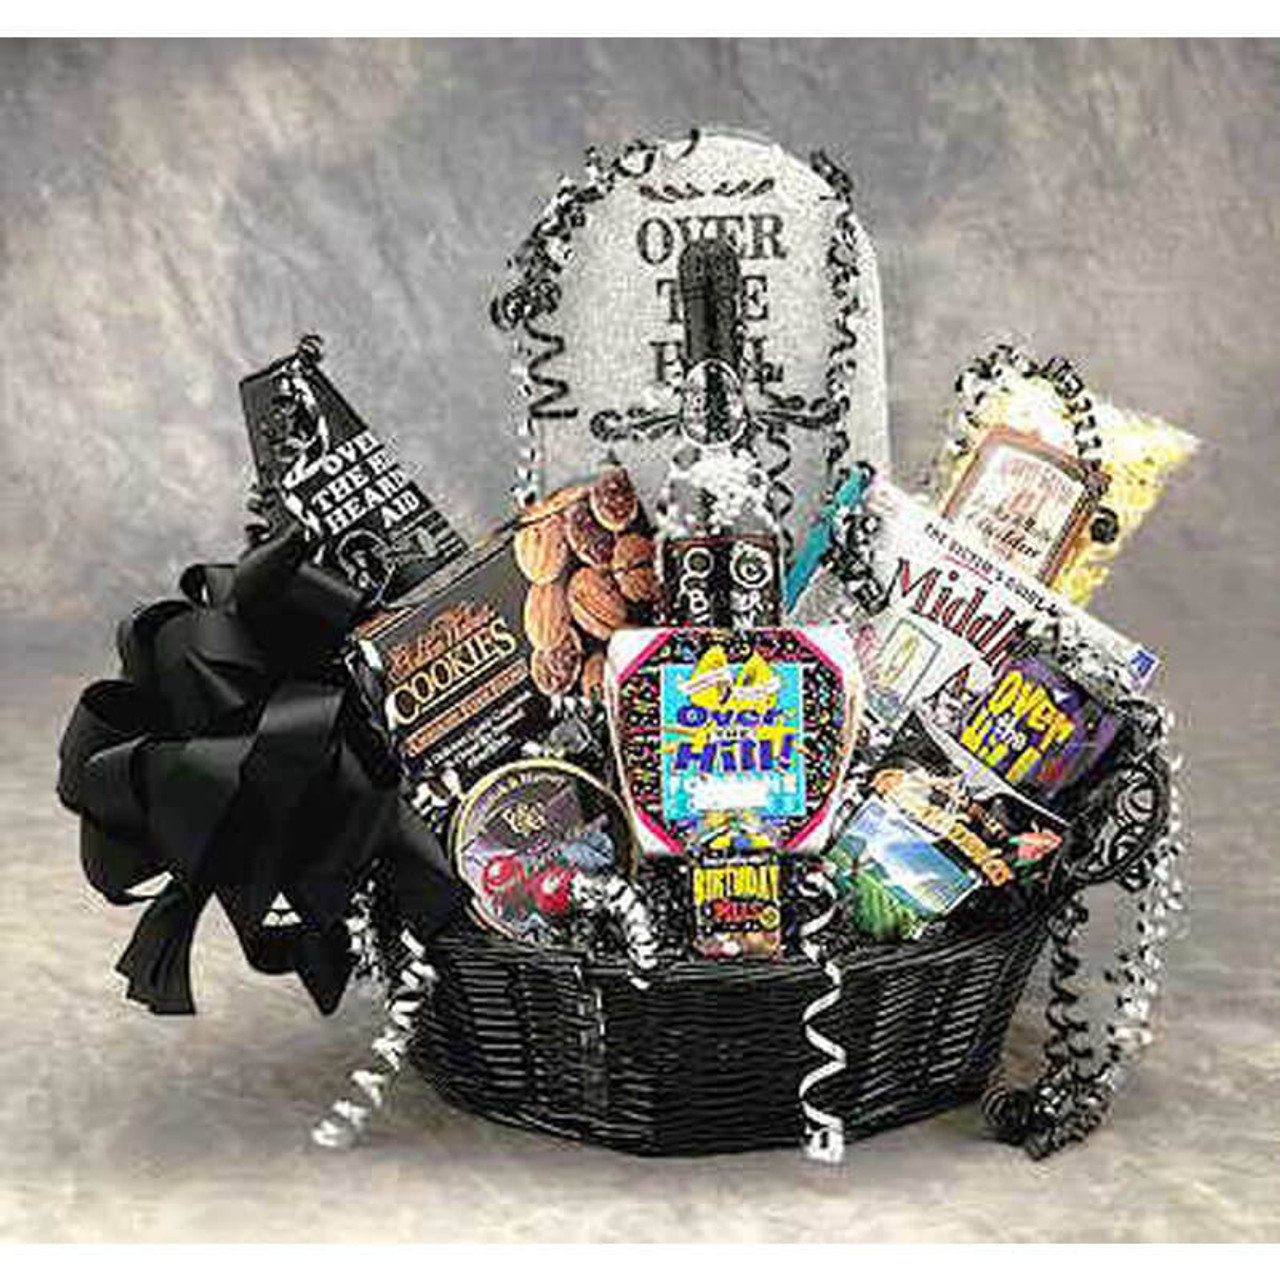 Over The Hill Birthday Basket - (Large)